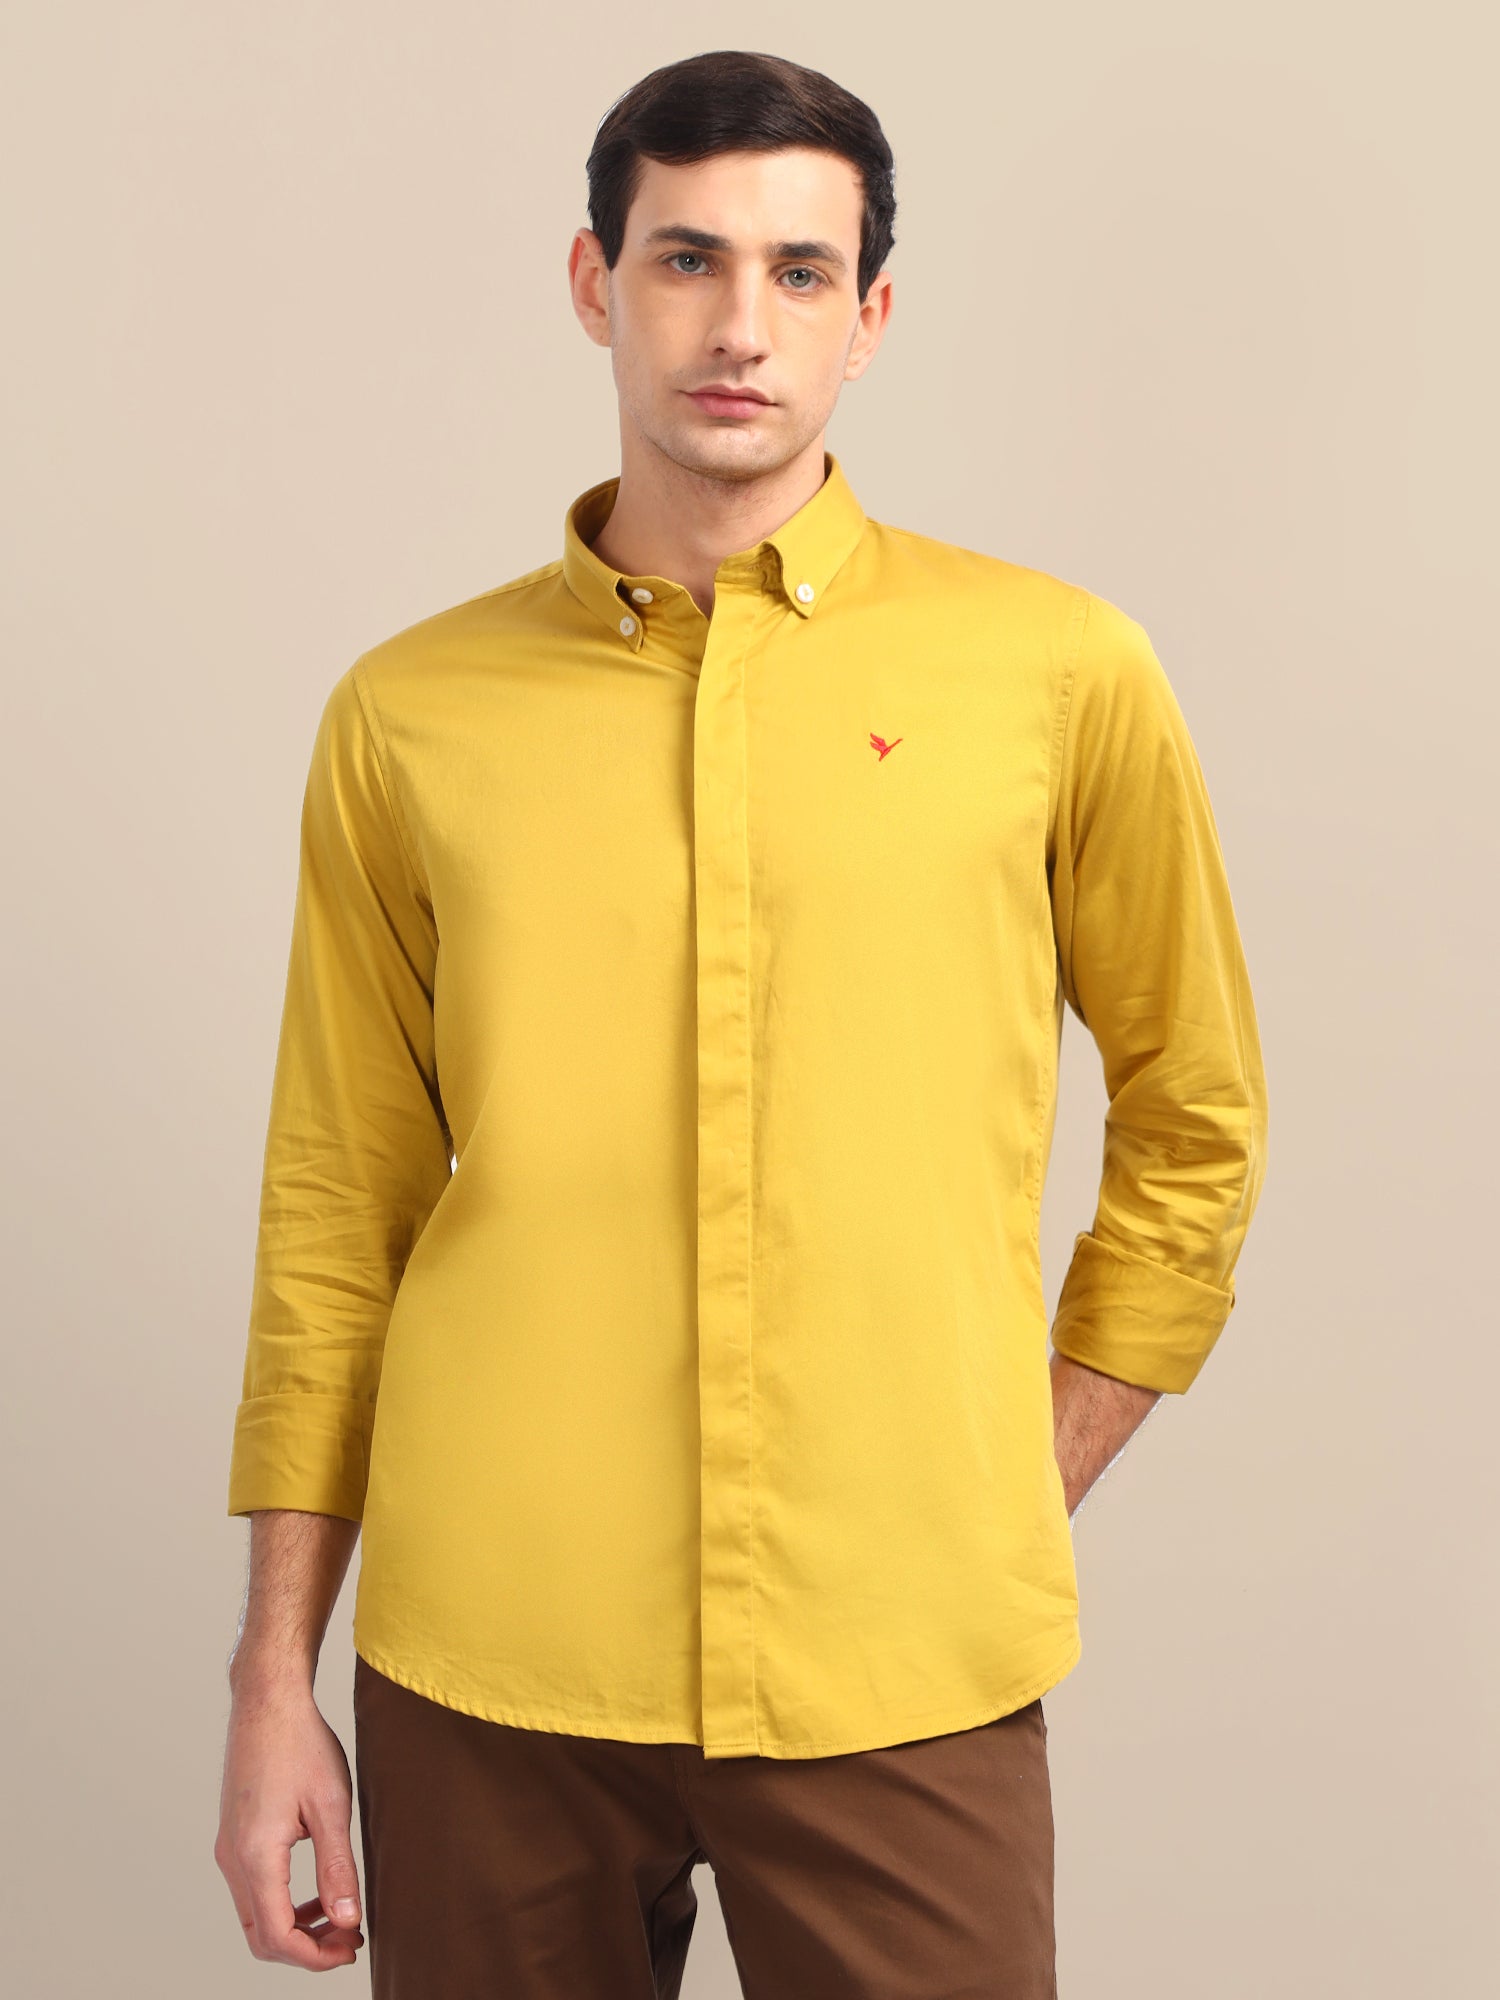 AMSWAN YELLOW ATHLEISURE SHIRTS WITH PREMIUM COTTON LYCRA BLEND